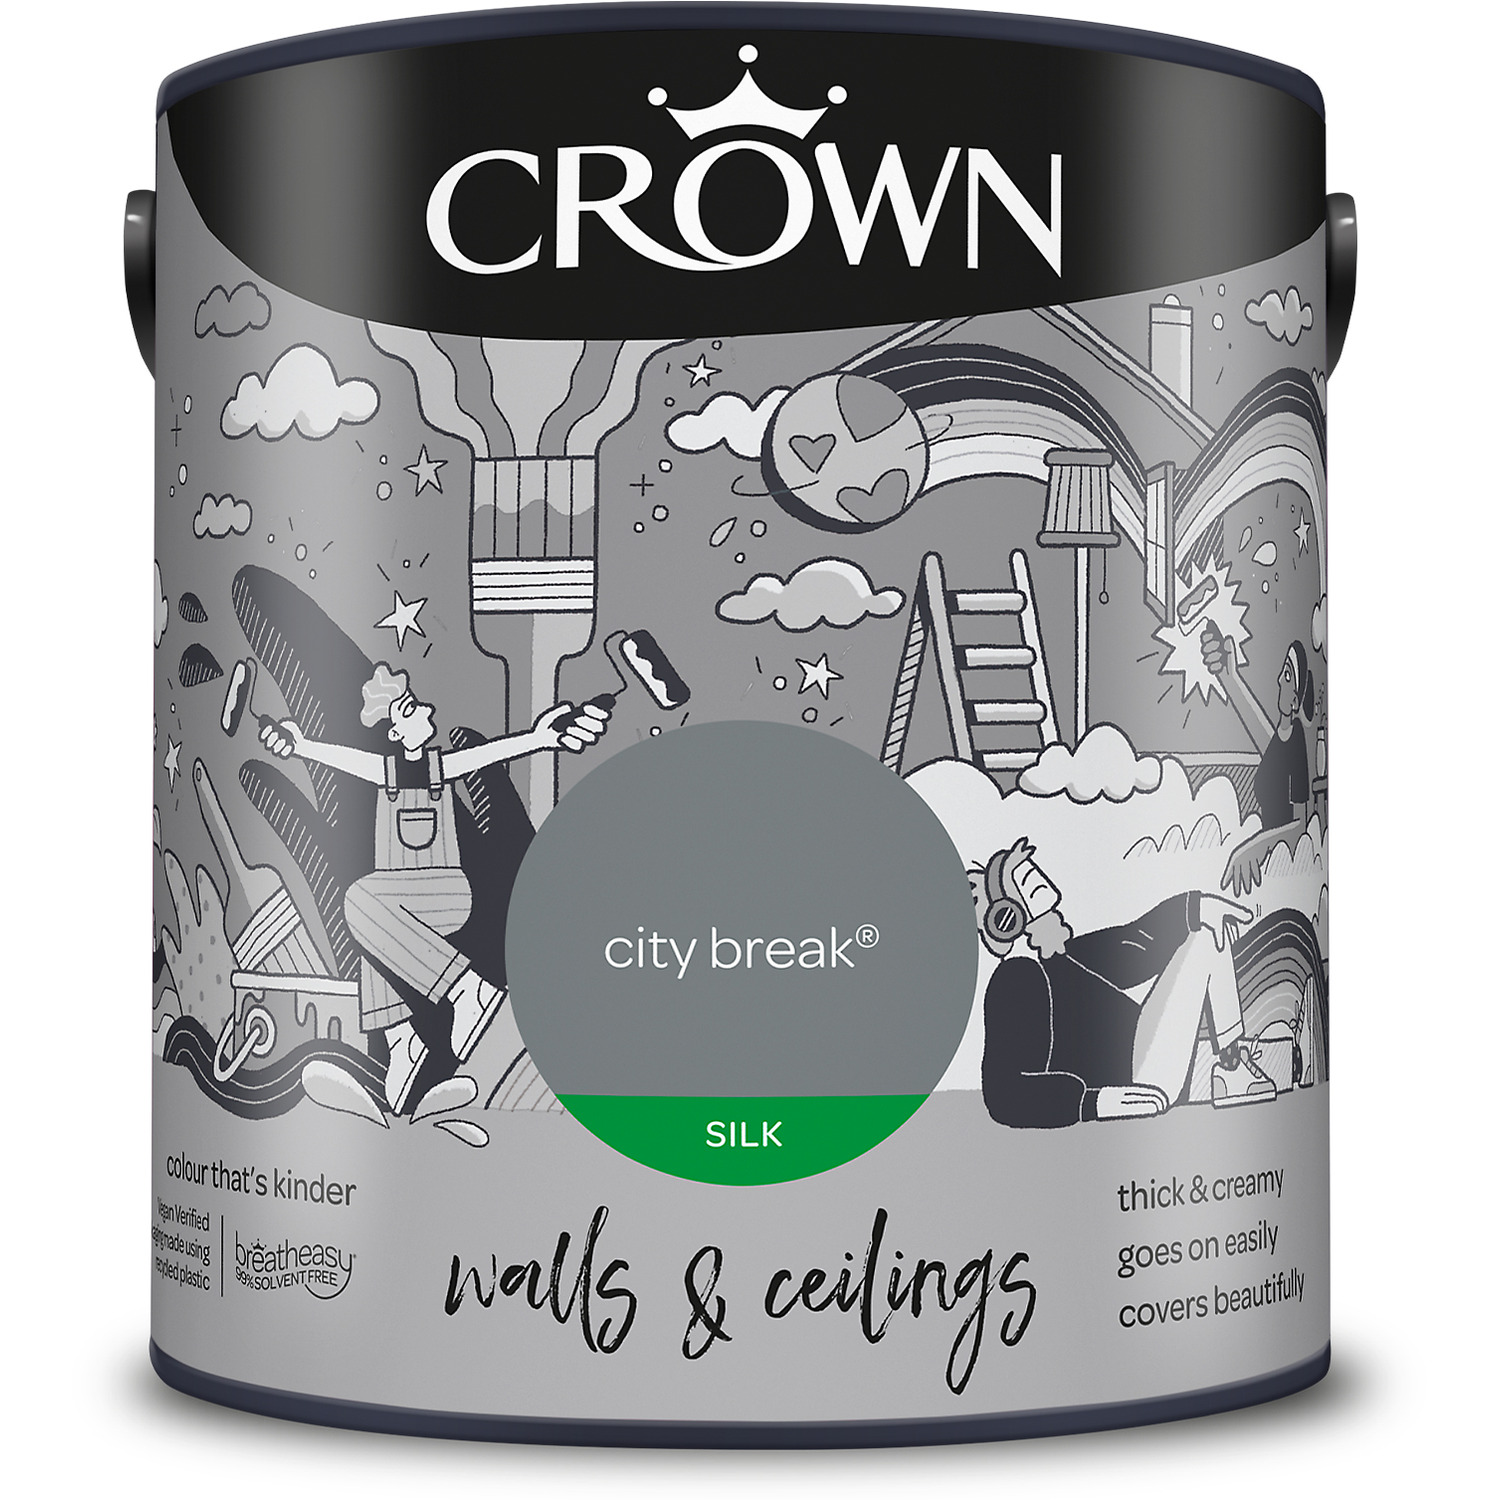 Crown Wall and Ceilings City Break Silk Emulsion 2.5L Image 2